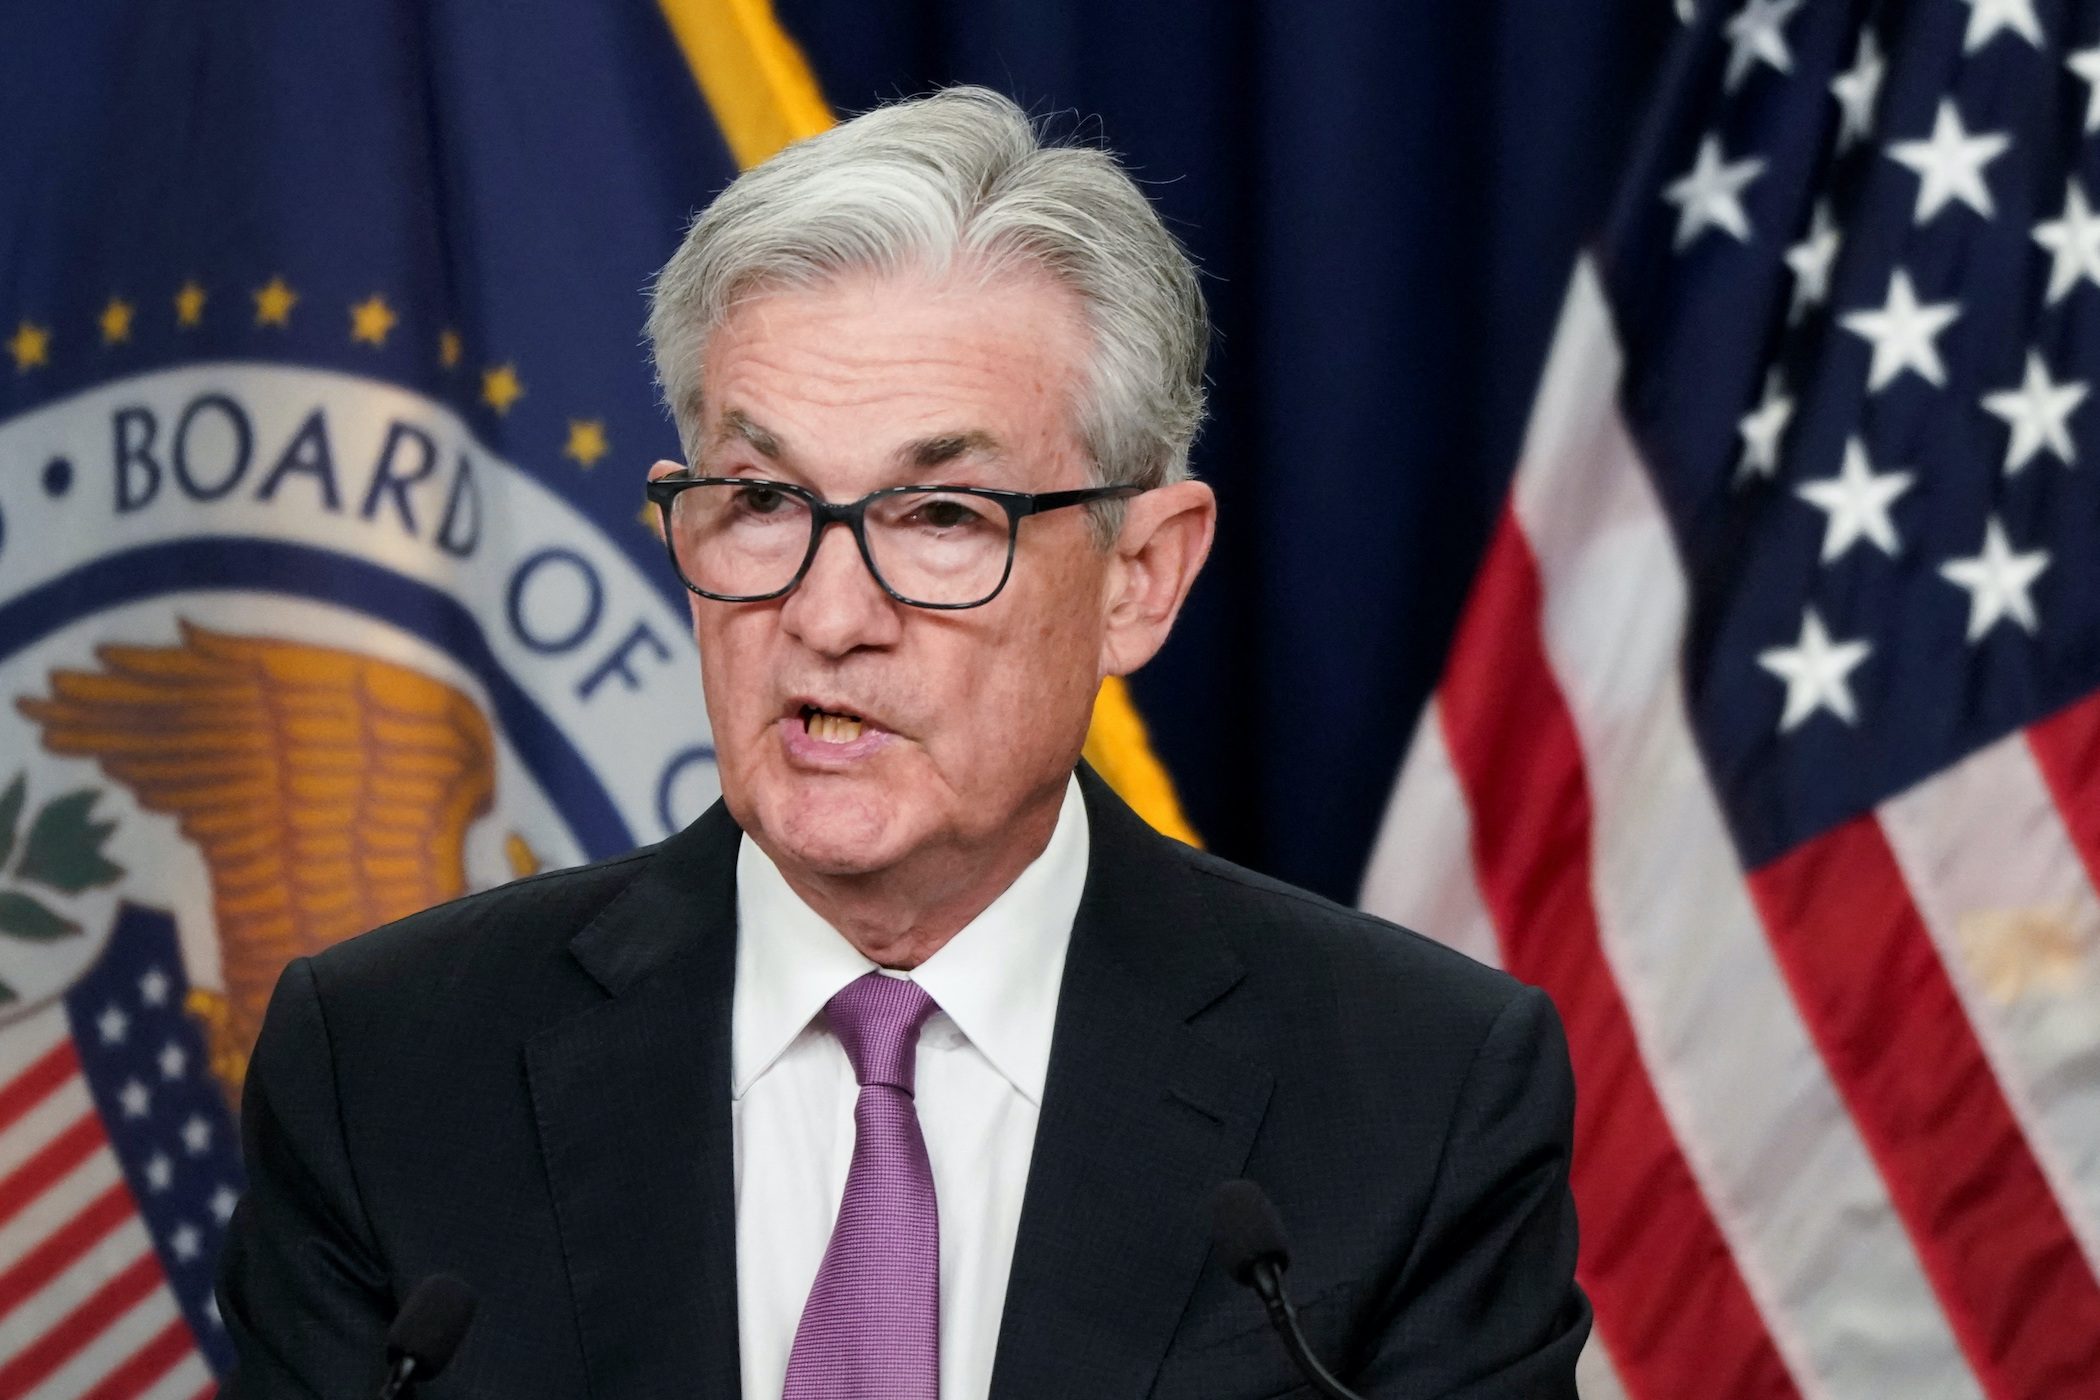 Fed jacks rates again, Powell vows no surrender in inflation battle